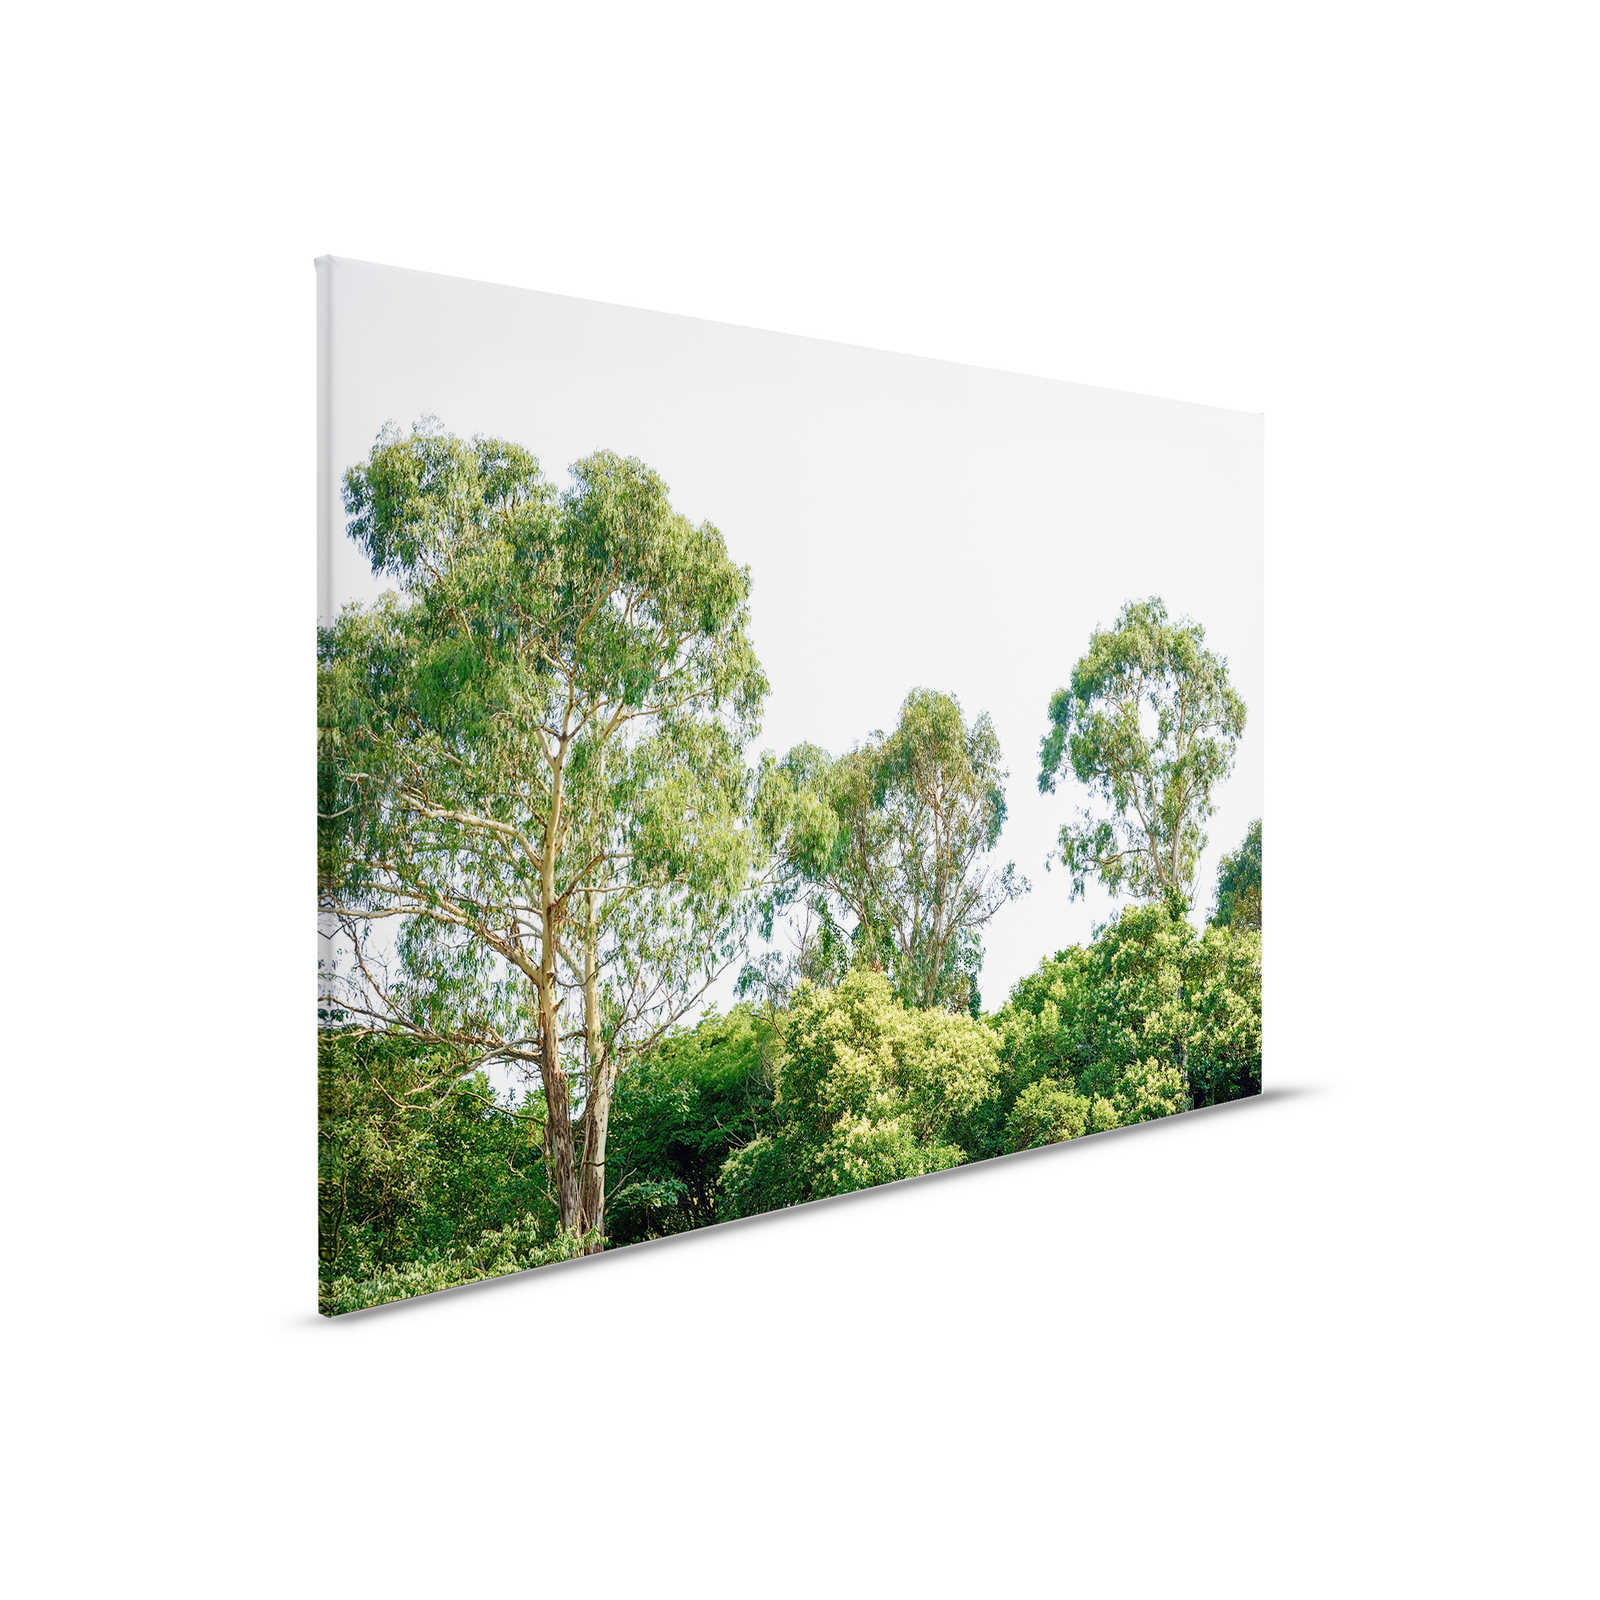 Canvas with treetops, forest motif - 0.90 m x 0.60 m
